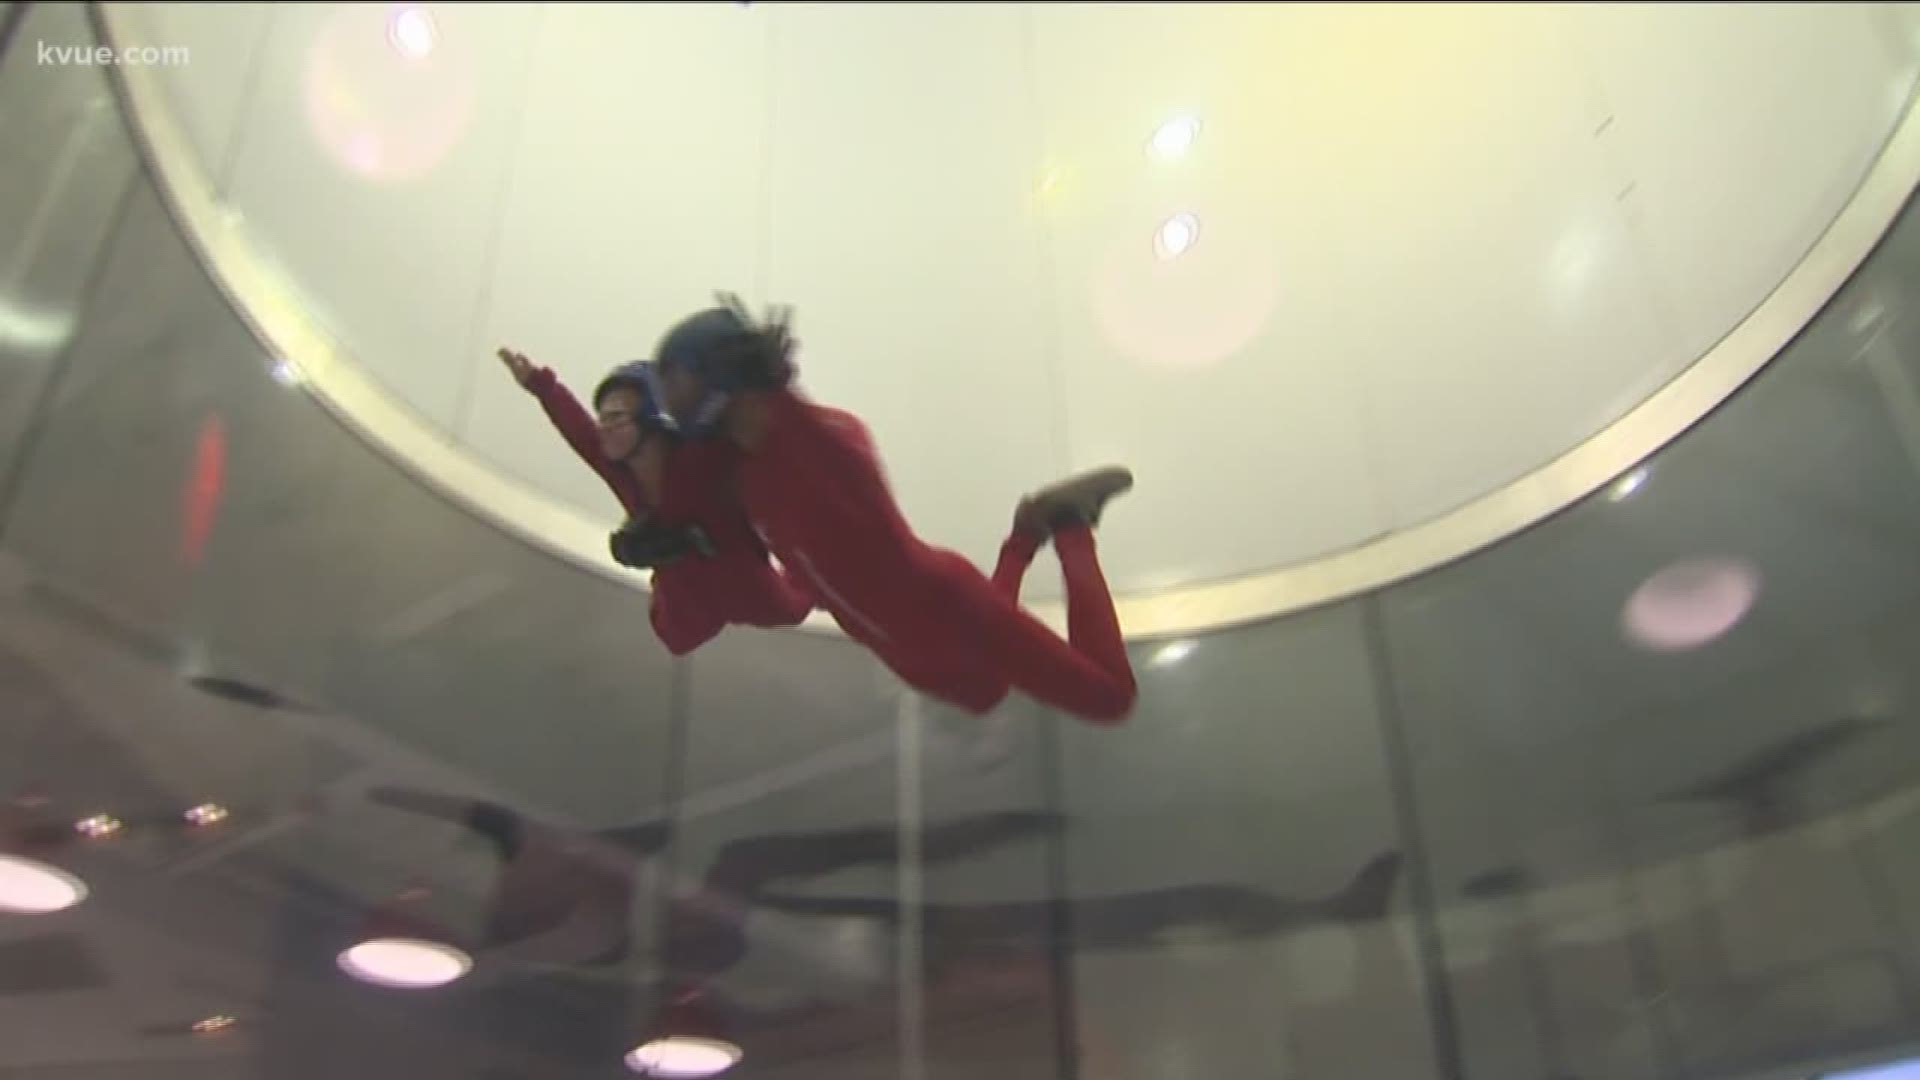 If you've ever wanted to fly with dragons, turns out, you really don't have to go too far! All it takes is a trip to IFly to soar alongside 'Toothless' from 'How to  Train Your Dragon.'